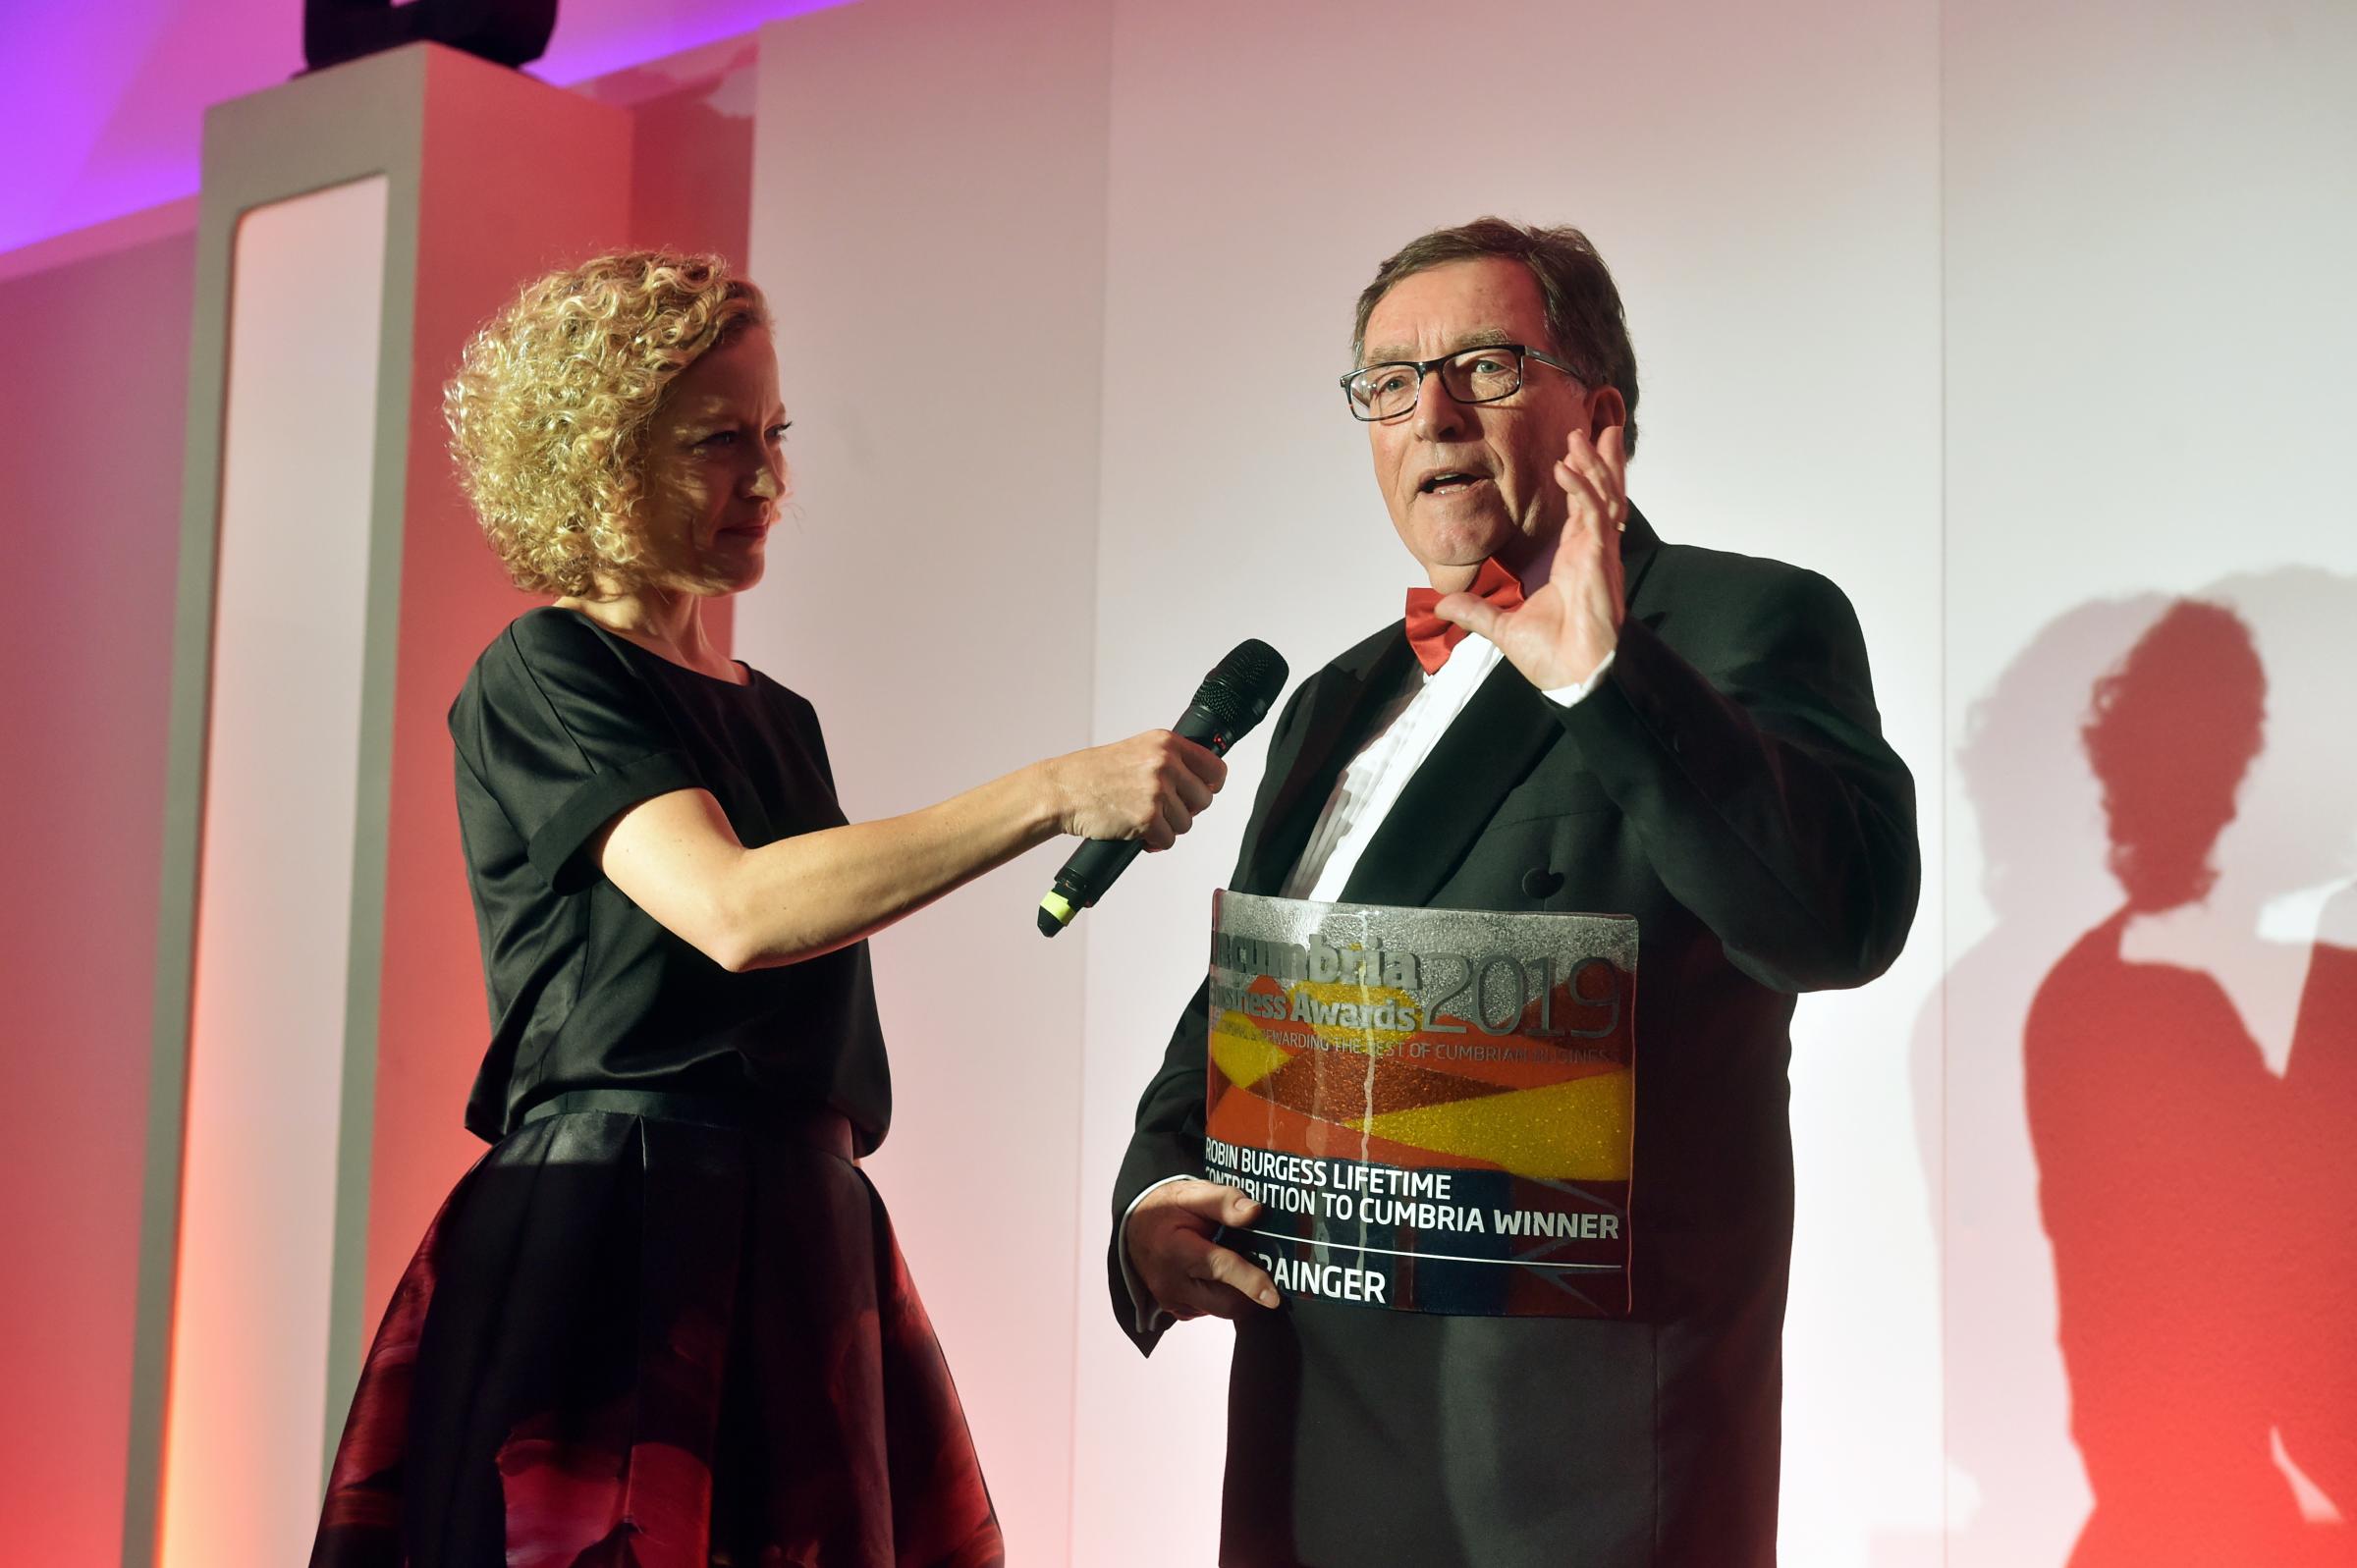 The in-cumbria Business Awards 2019, at The Halston, Carlisle, 14 November 2019...Guest speaker and compere Cathy Newman with John Grainger, executive director of Britains Energy Coast Business Cluster and winner of The Robin Burgess Lifetime